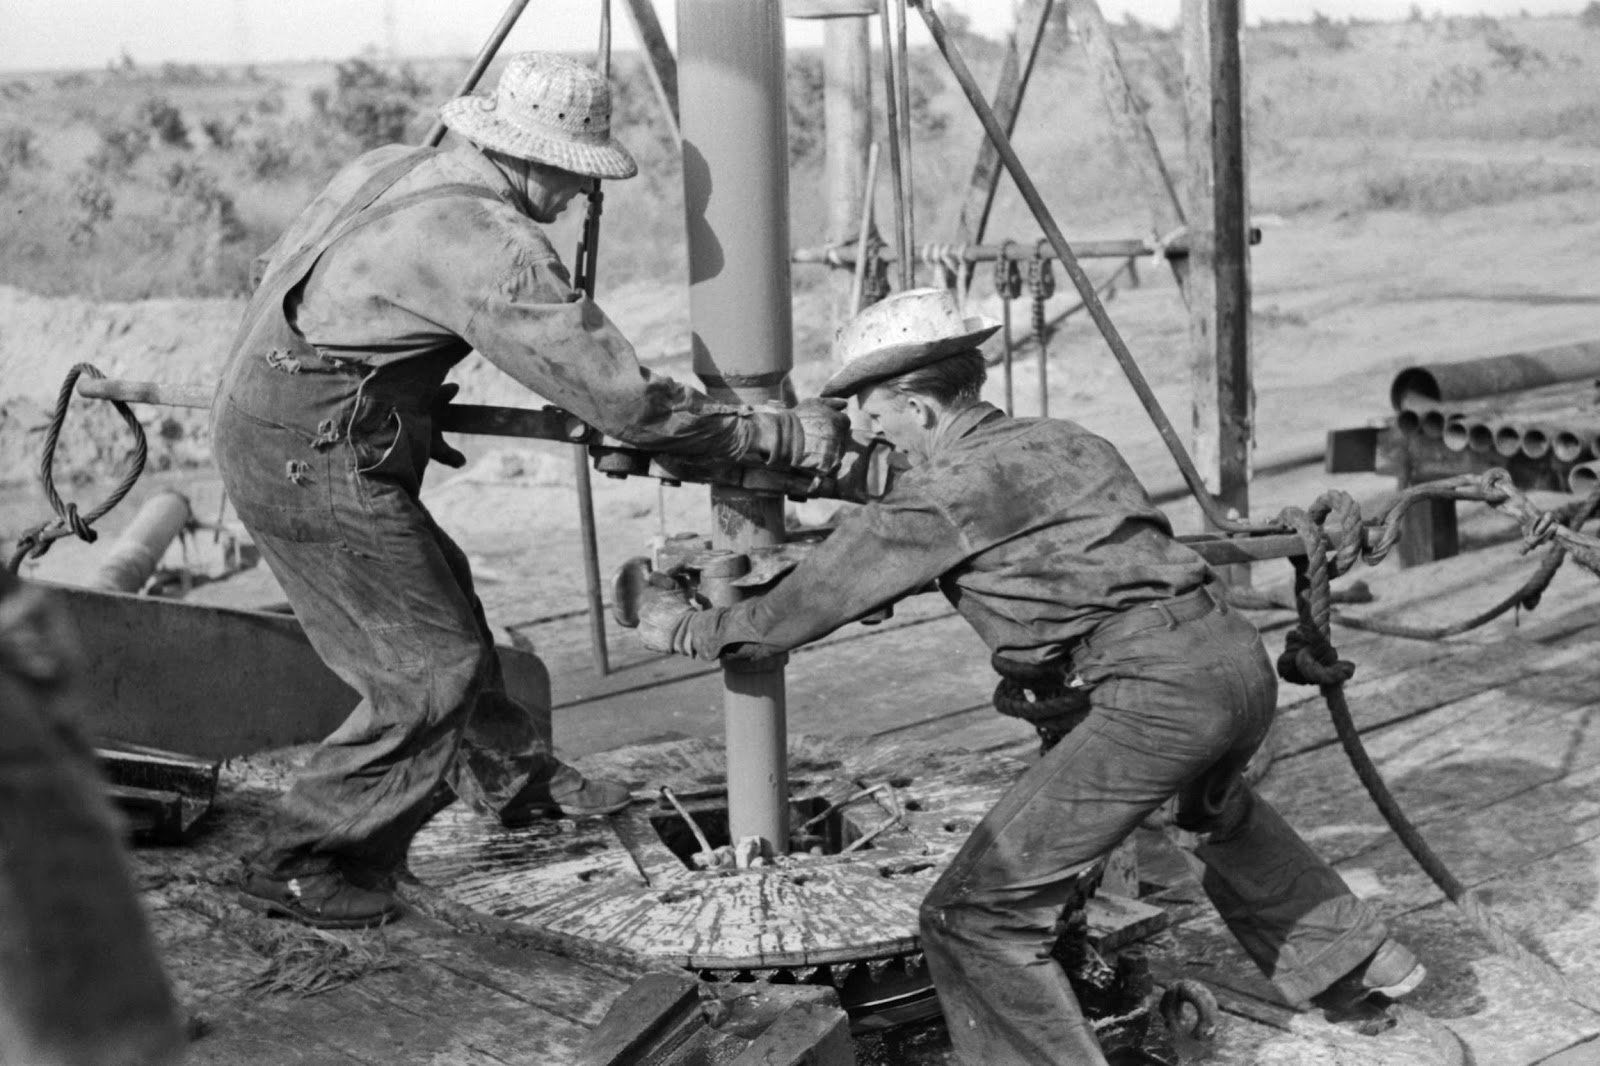 Russell Lee - Adding a length of drilling pipe at oil well in Seminole oil field, Oklahoma. Wrenches applied to loosen pipe, 1939